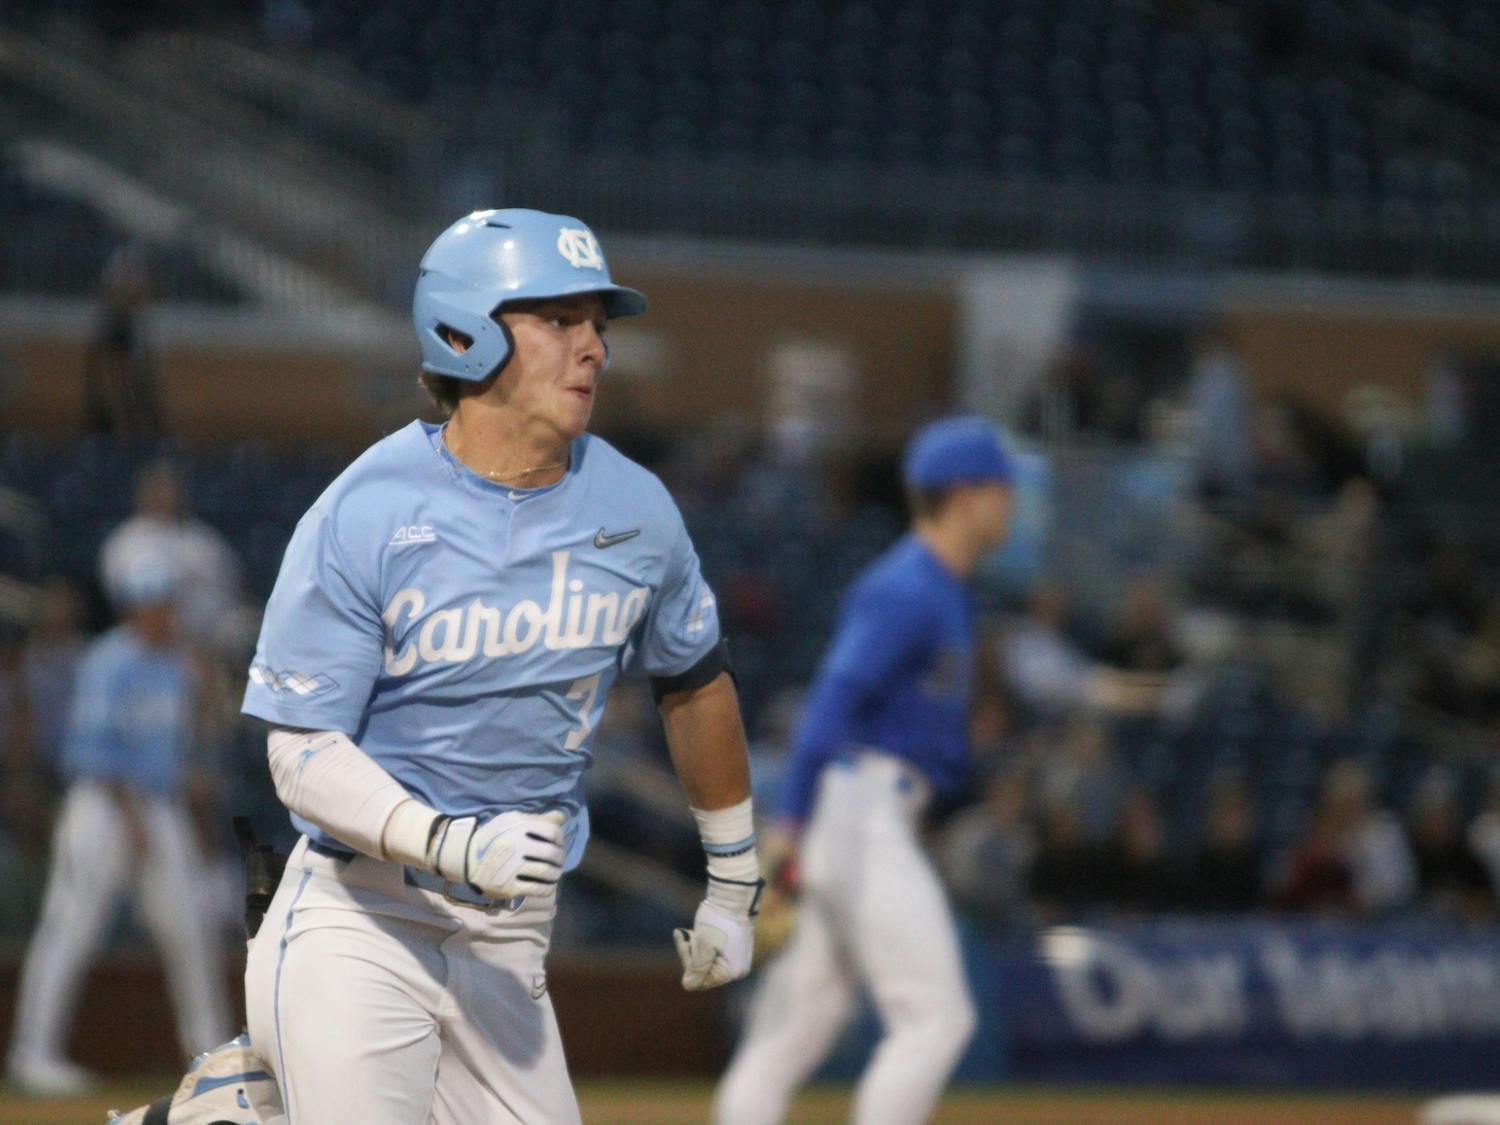 Infielder Vance Honeycutt (7) gets the first hit of the game for the Heels. The Heels lost to Duke 3-9 away on Saturday, March 19, 2022.